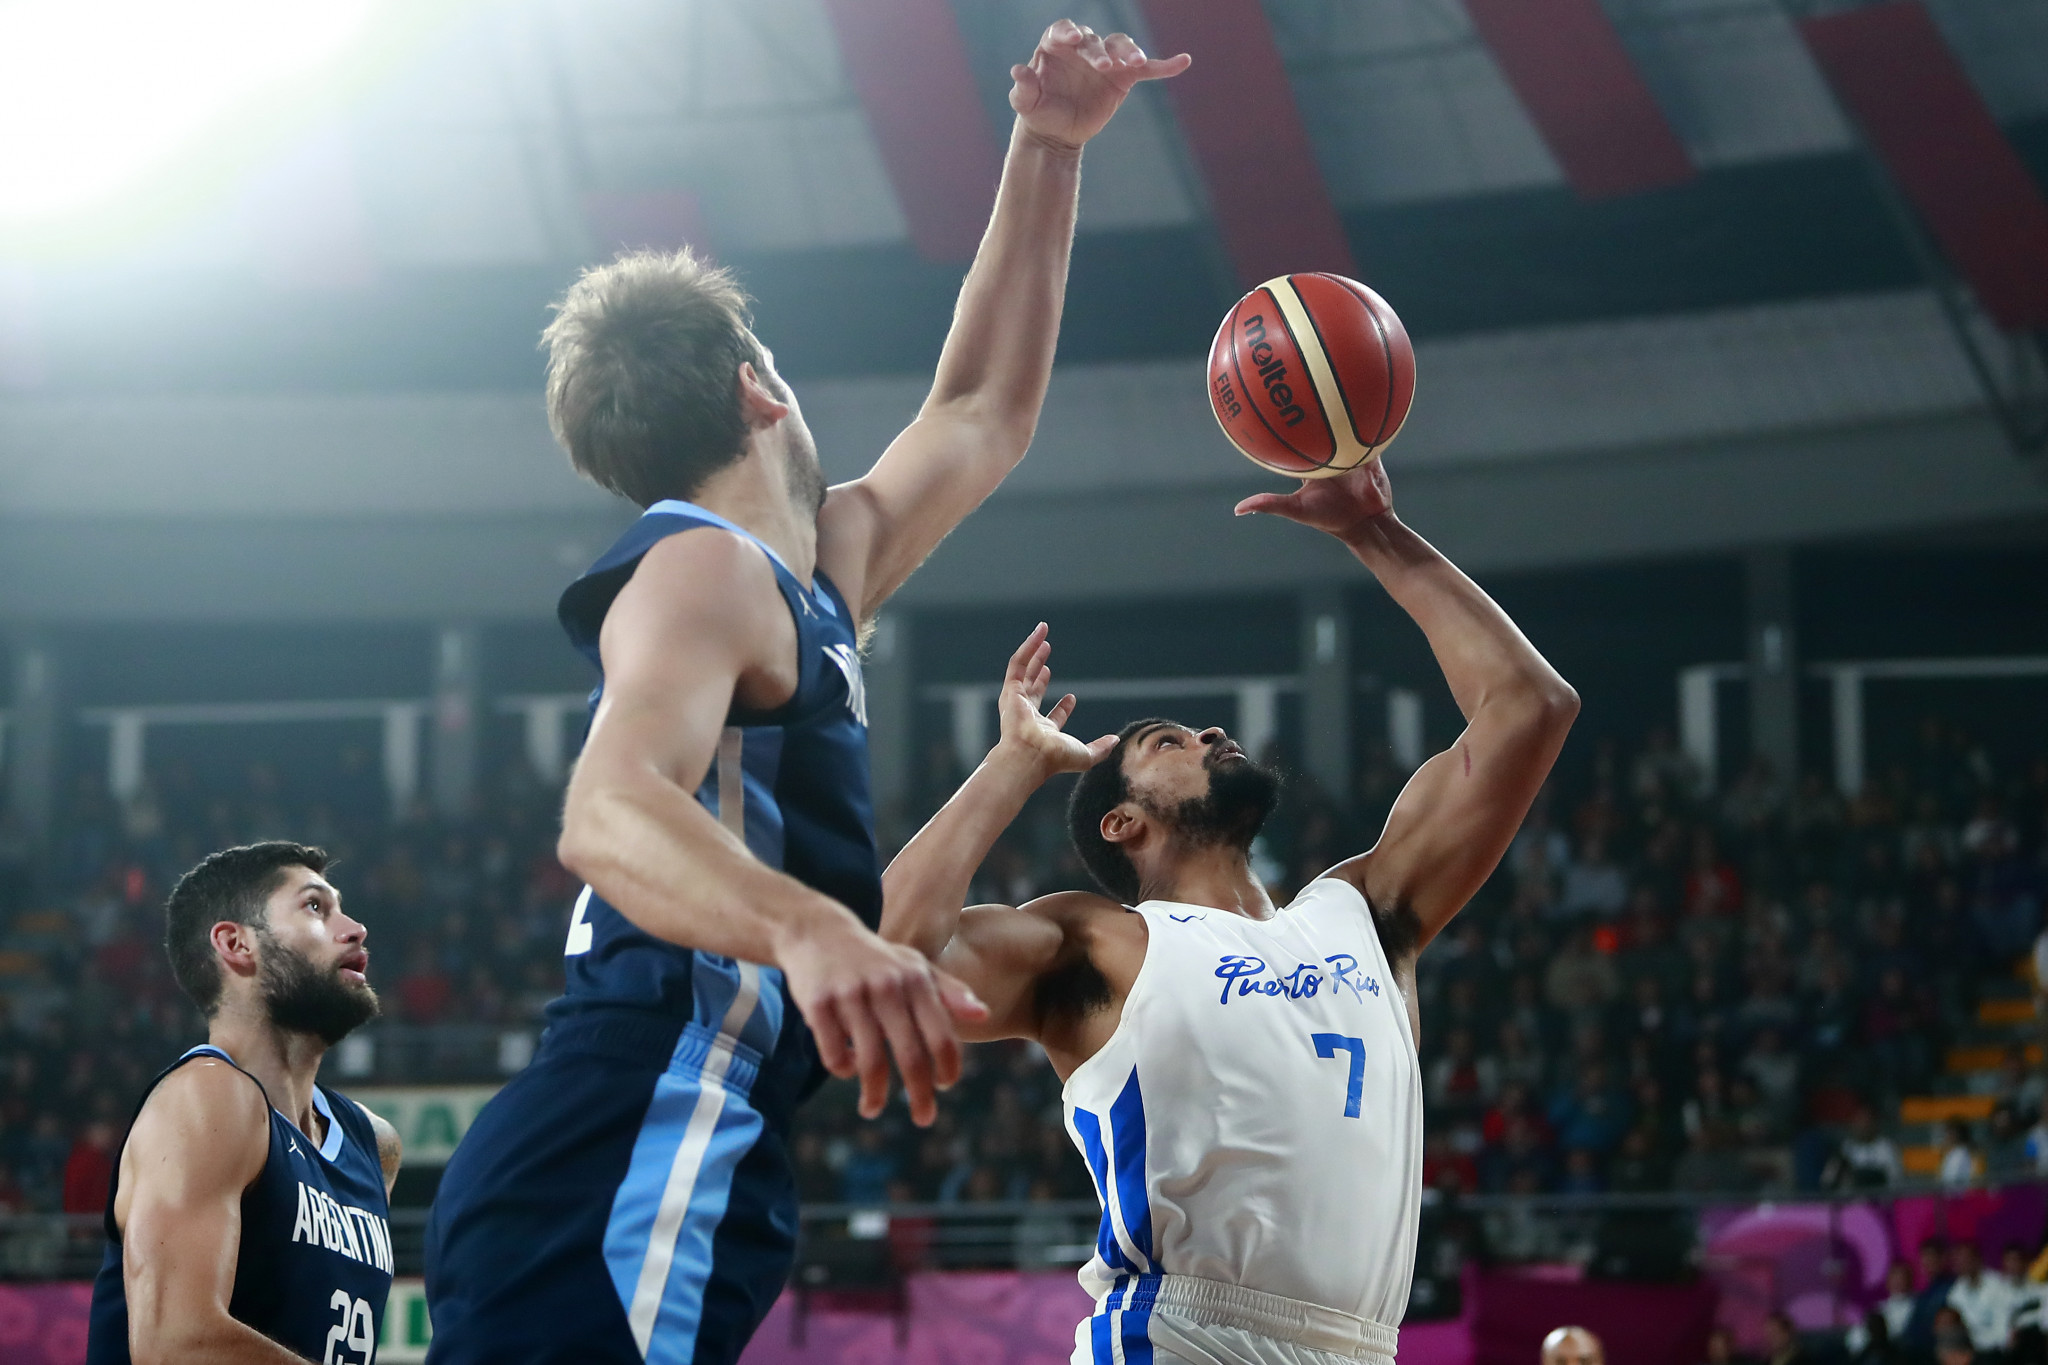 Argentina defeated Puerto Rico to claim the Lima 2019 men's basketball gold medal ©Lima 2019